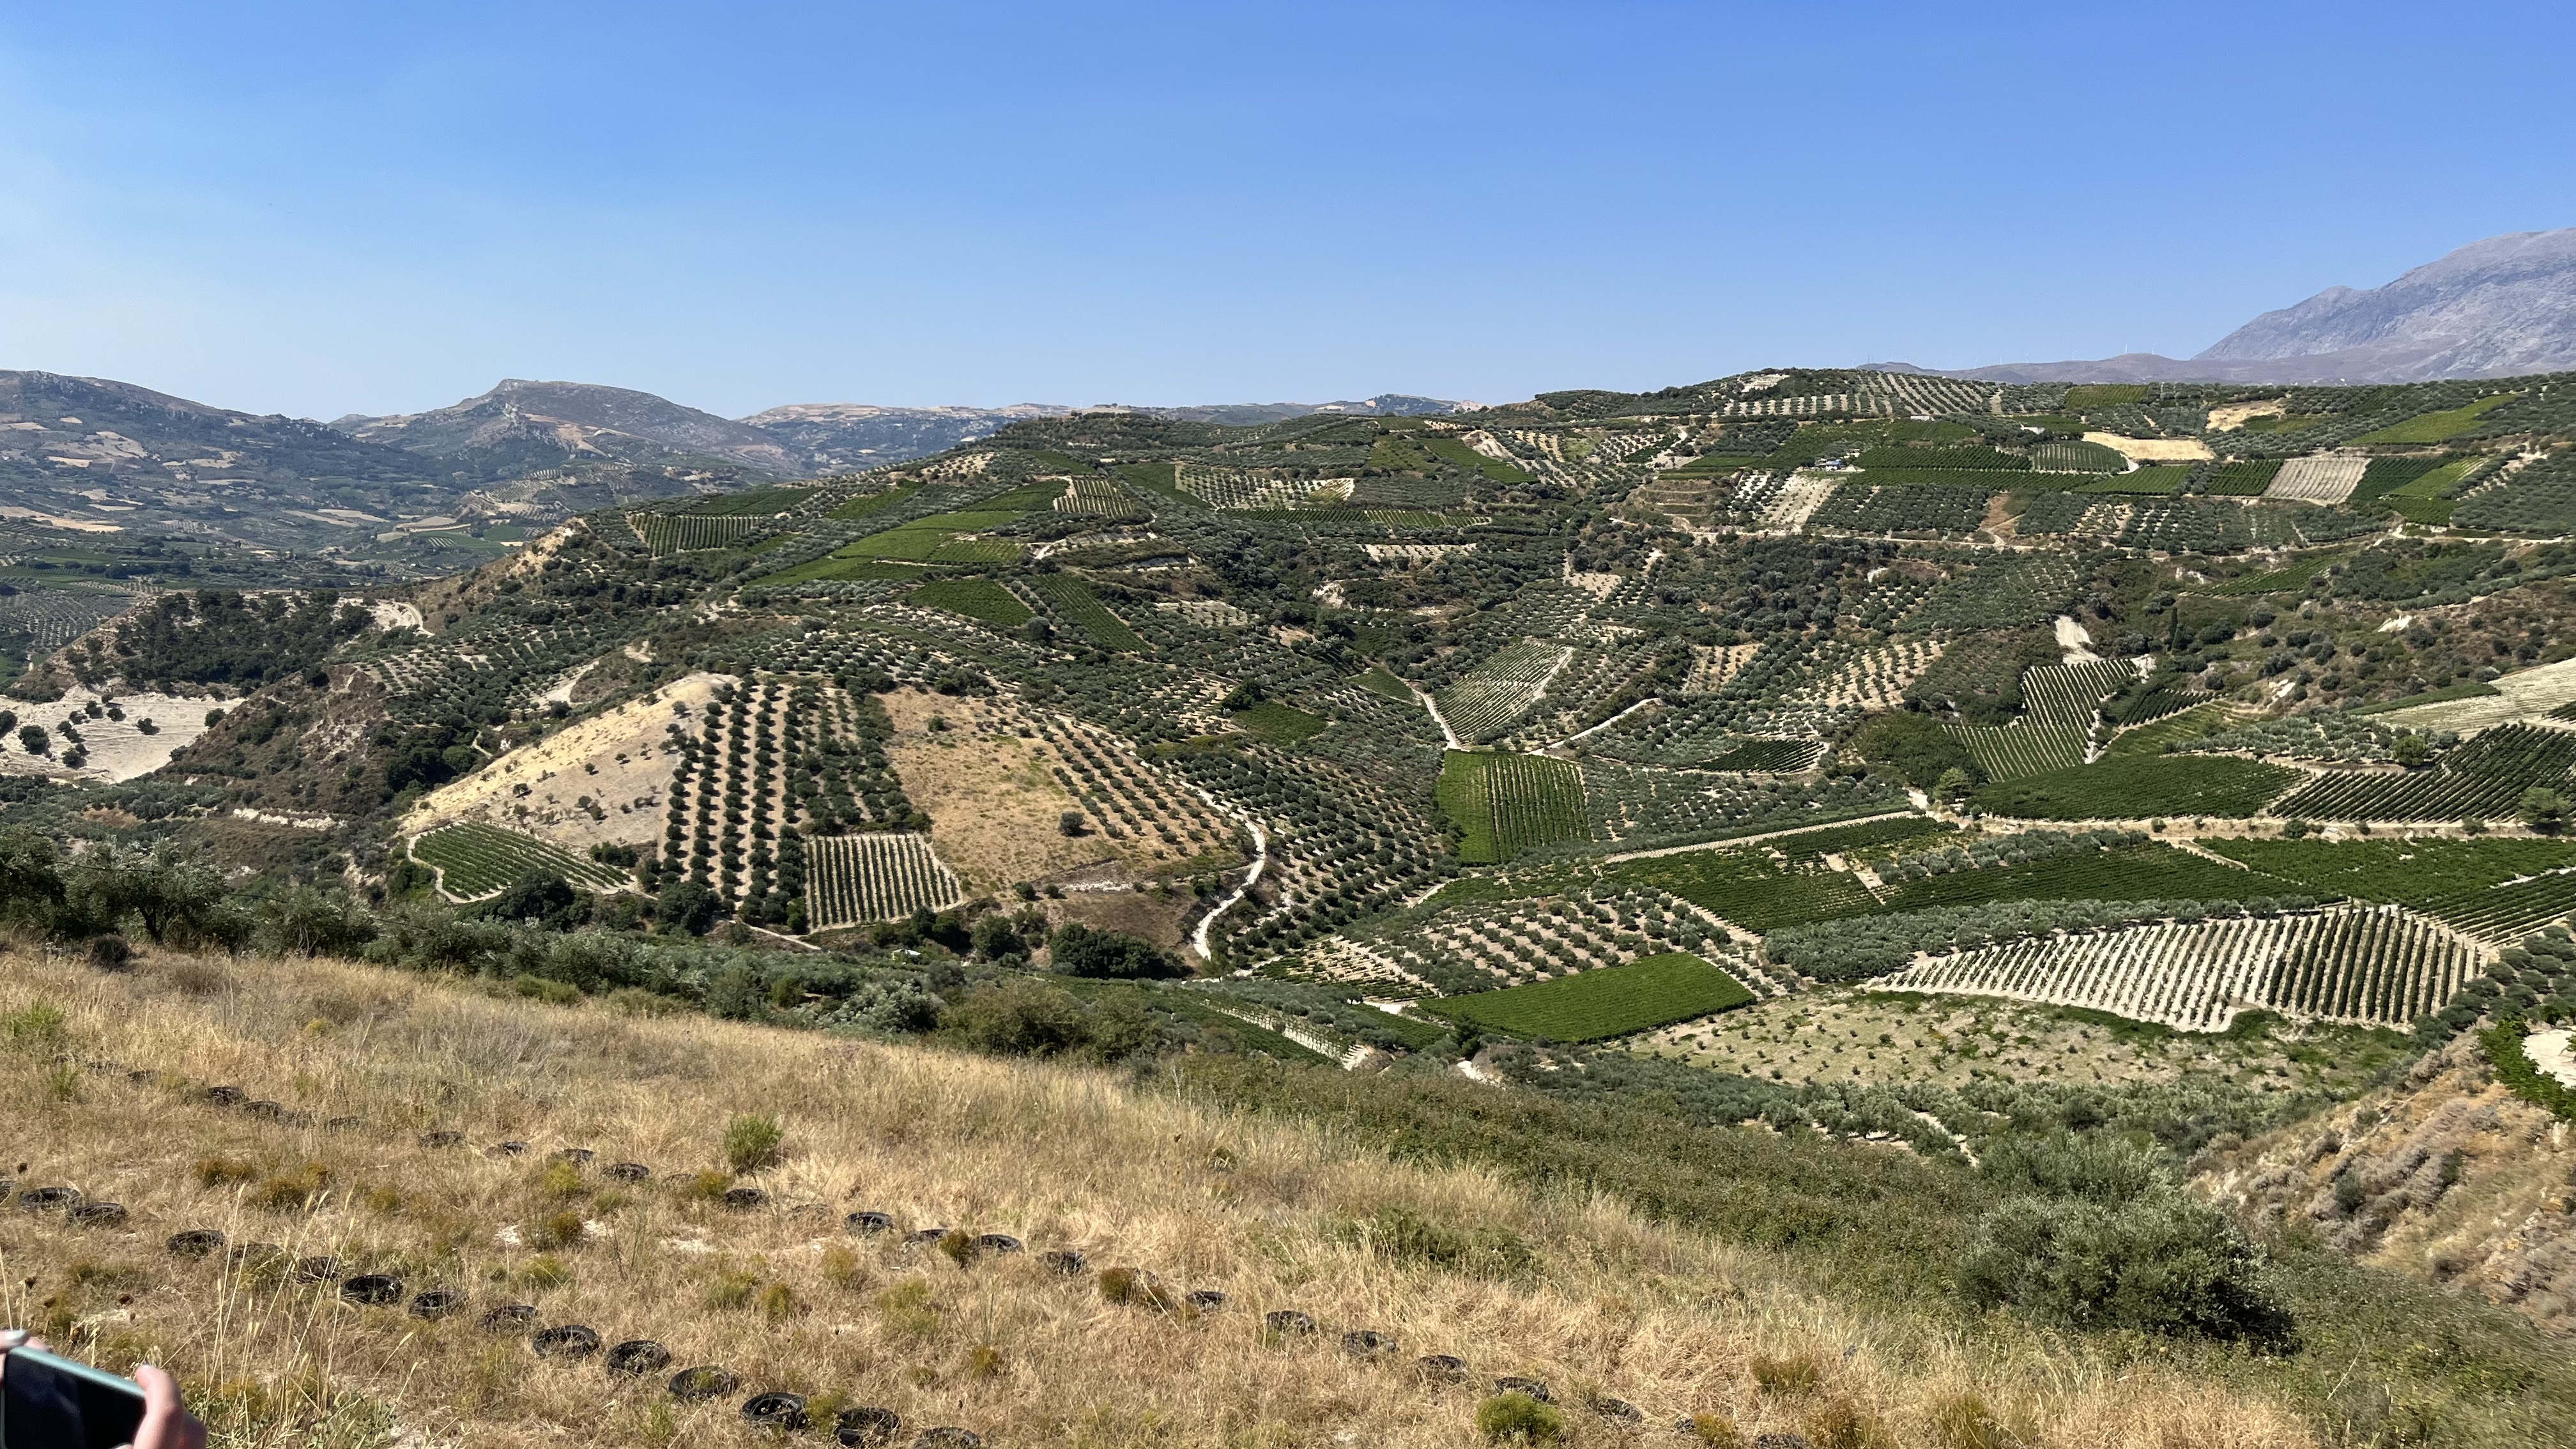 Patchwork of olive groves and grape vines